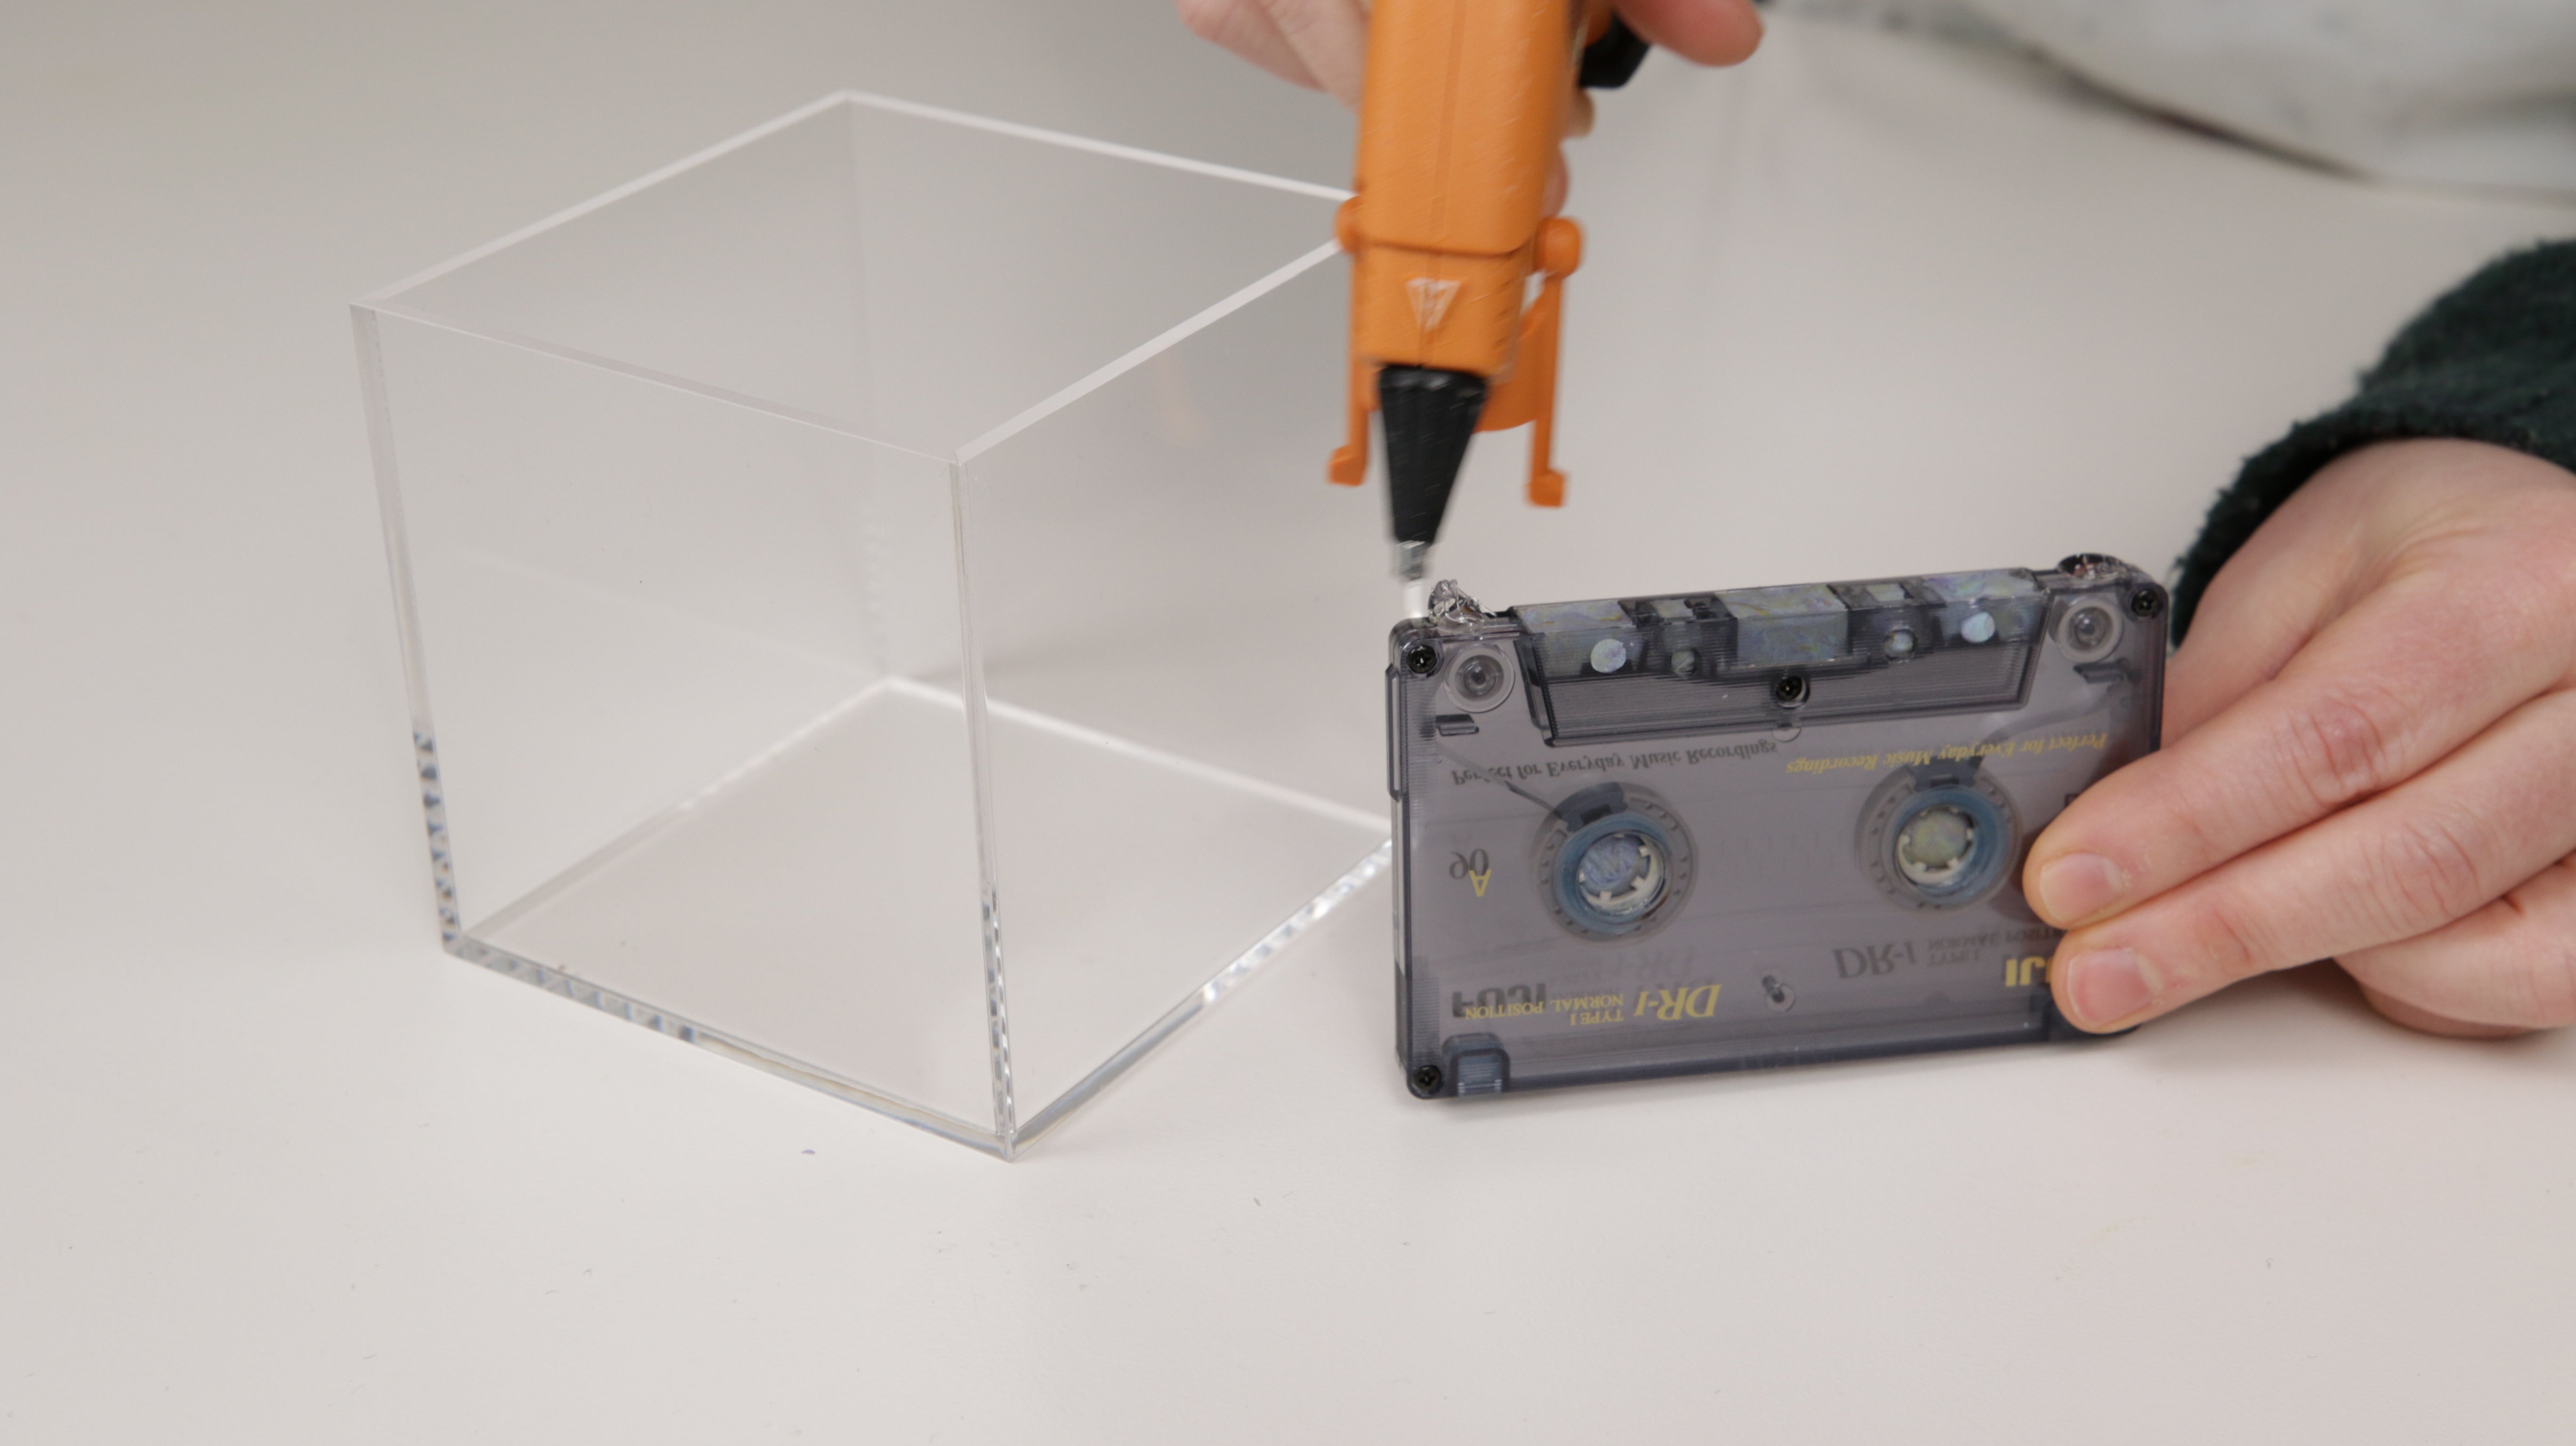 hot glue gun on cassette tape to hold it in place inside mold box